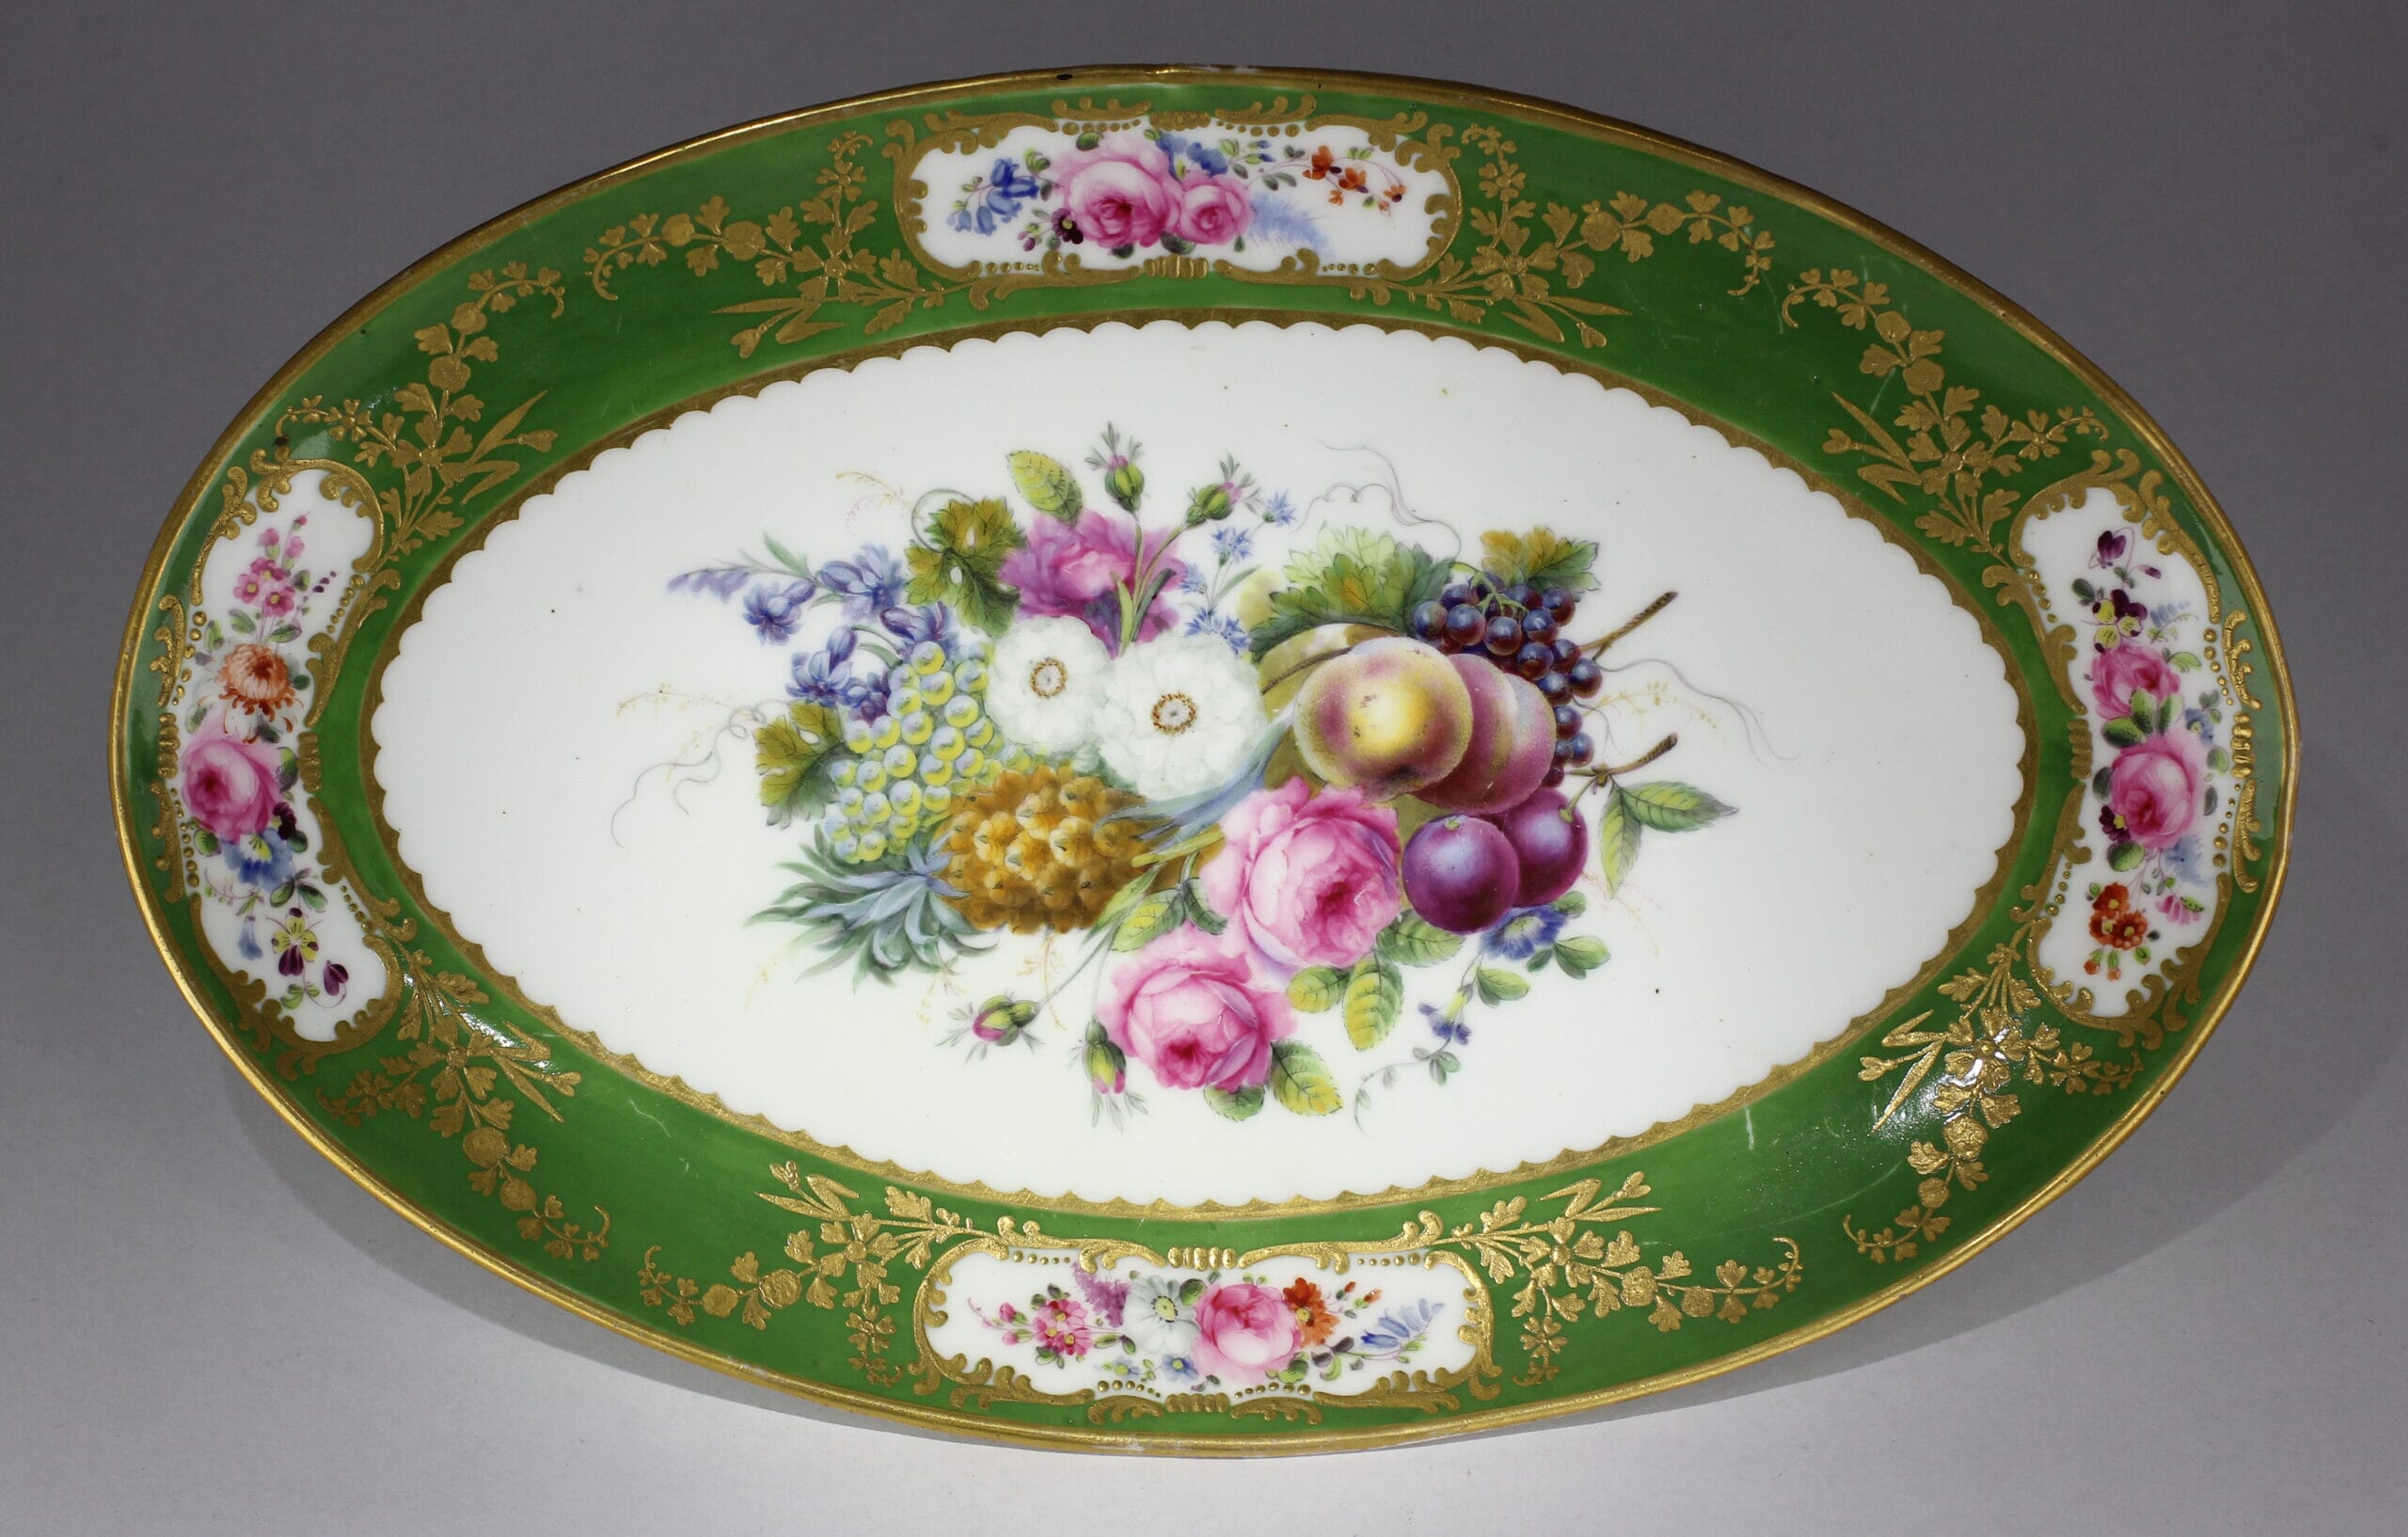 Sèvres oval dish, London decorated, fruit flowers & a pineapple, c. 1820. -0